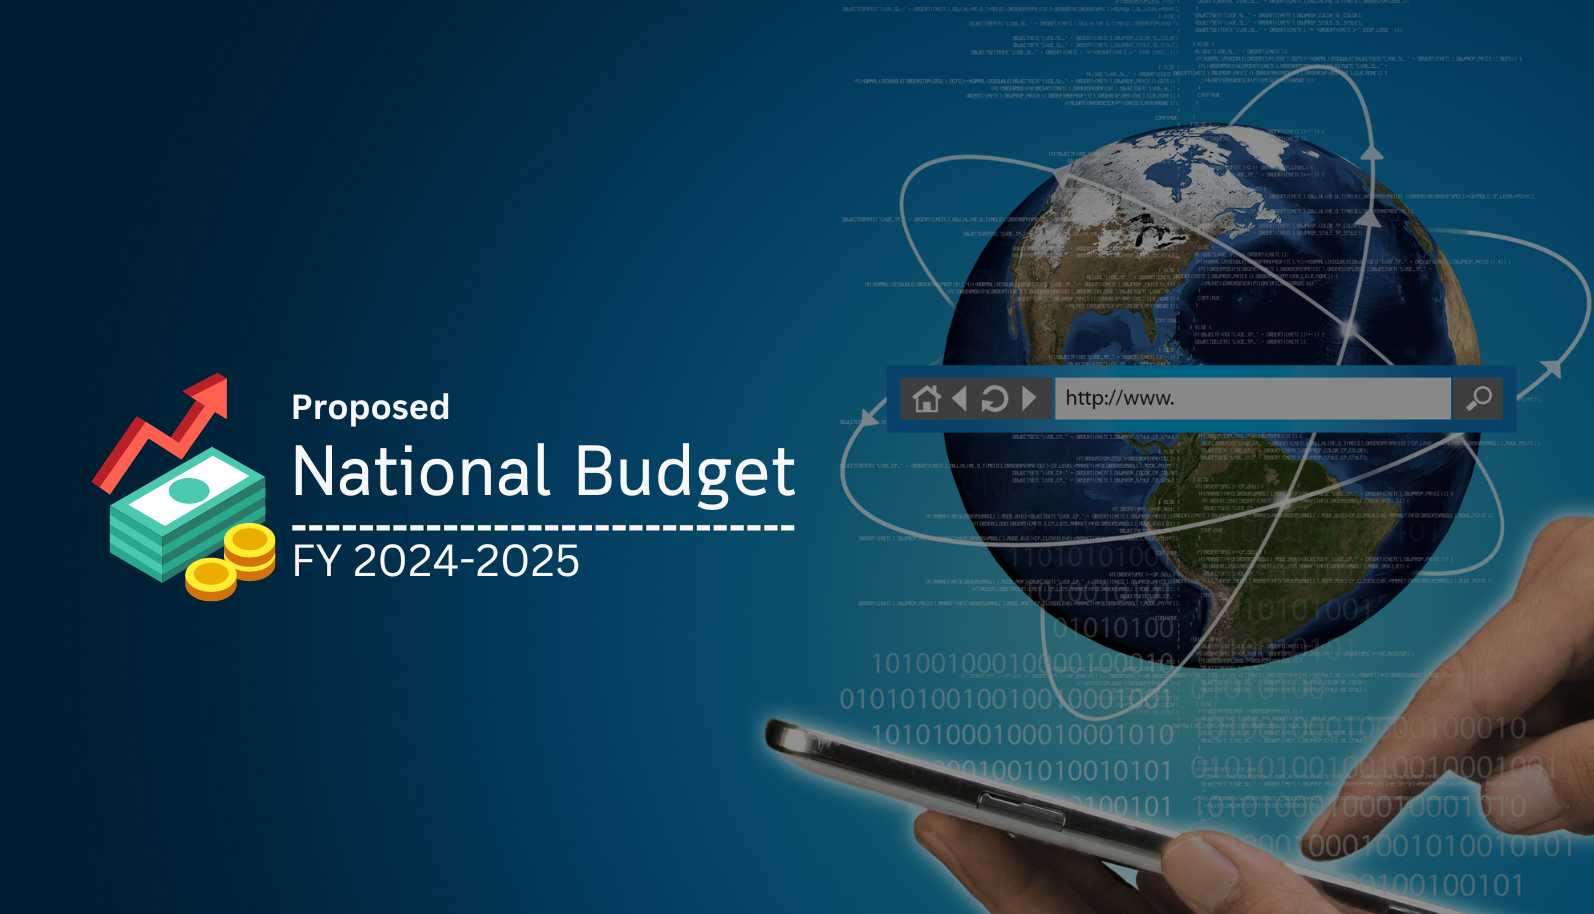 Supplementary Duty on Mobile Internet Increased in 2024-25 Budget-Markedium